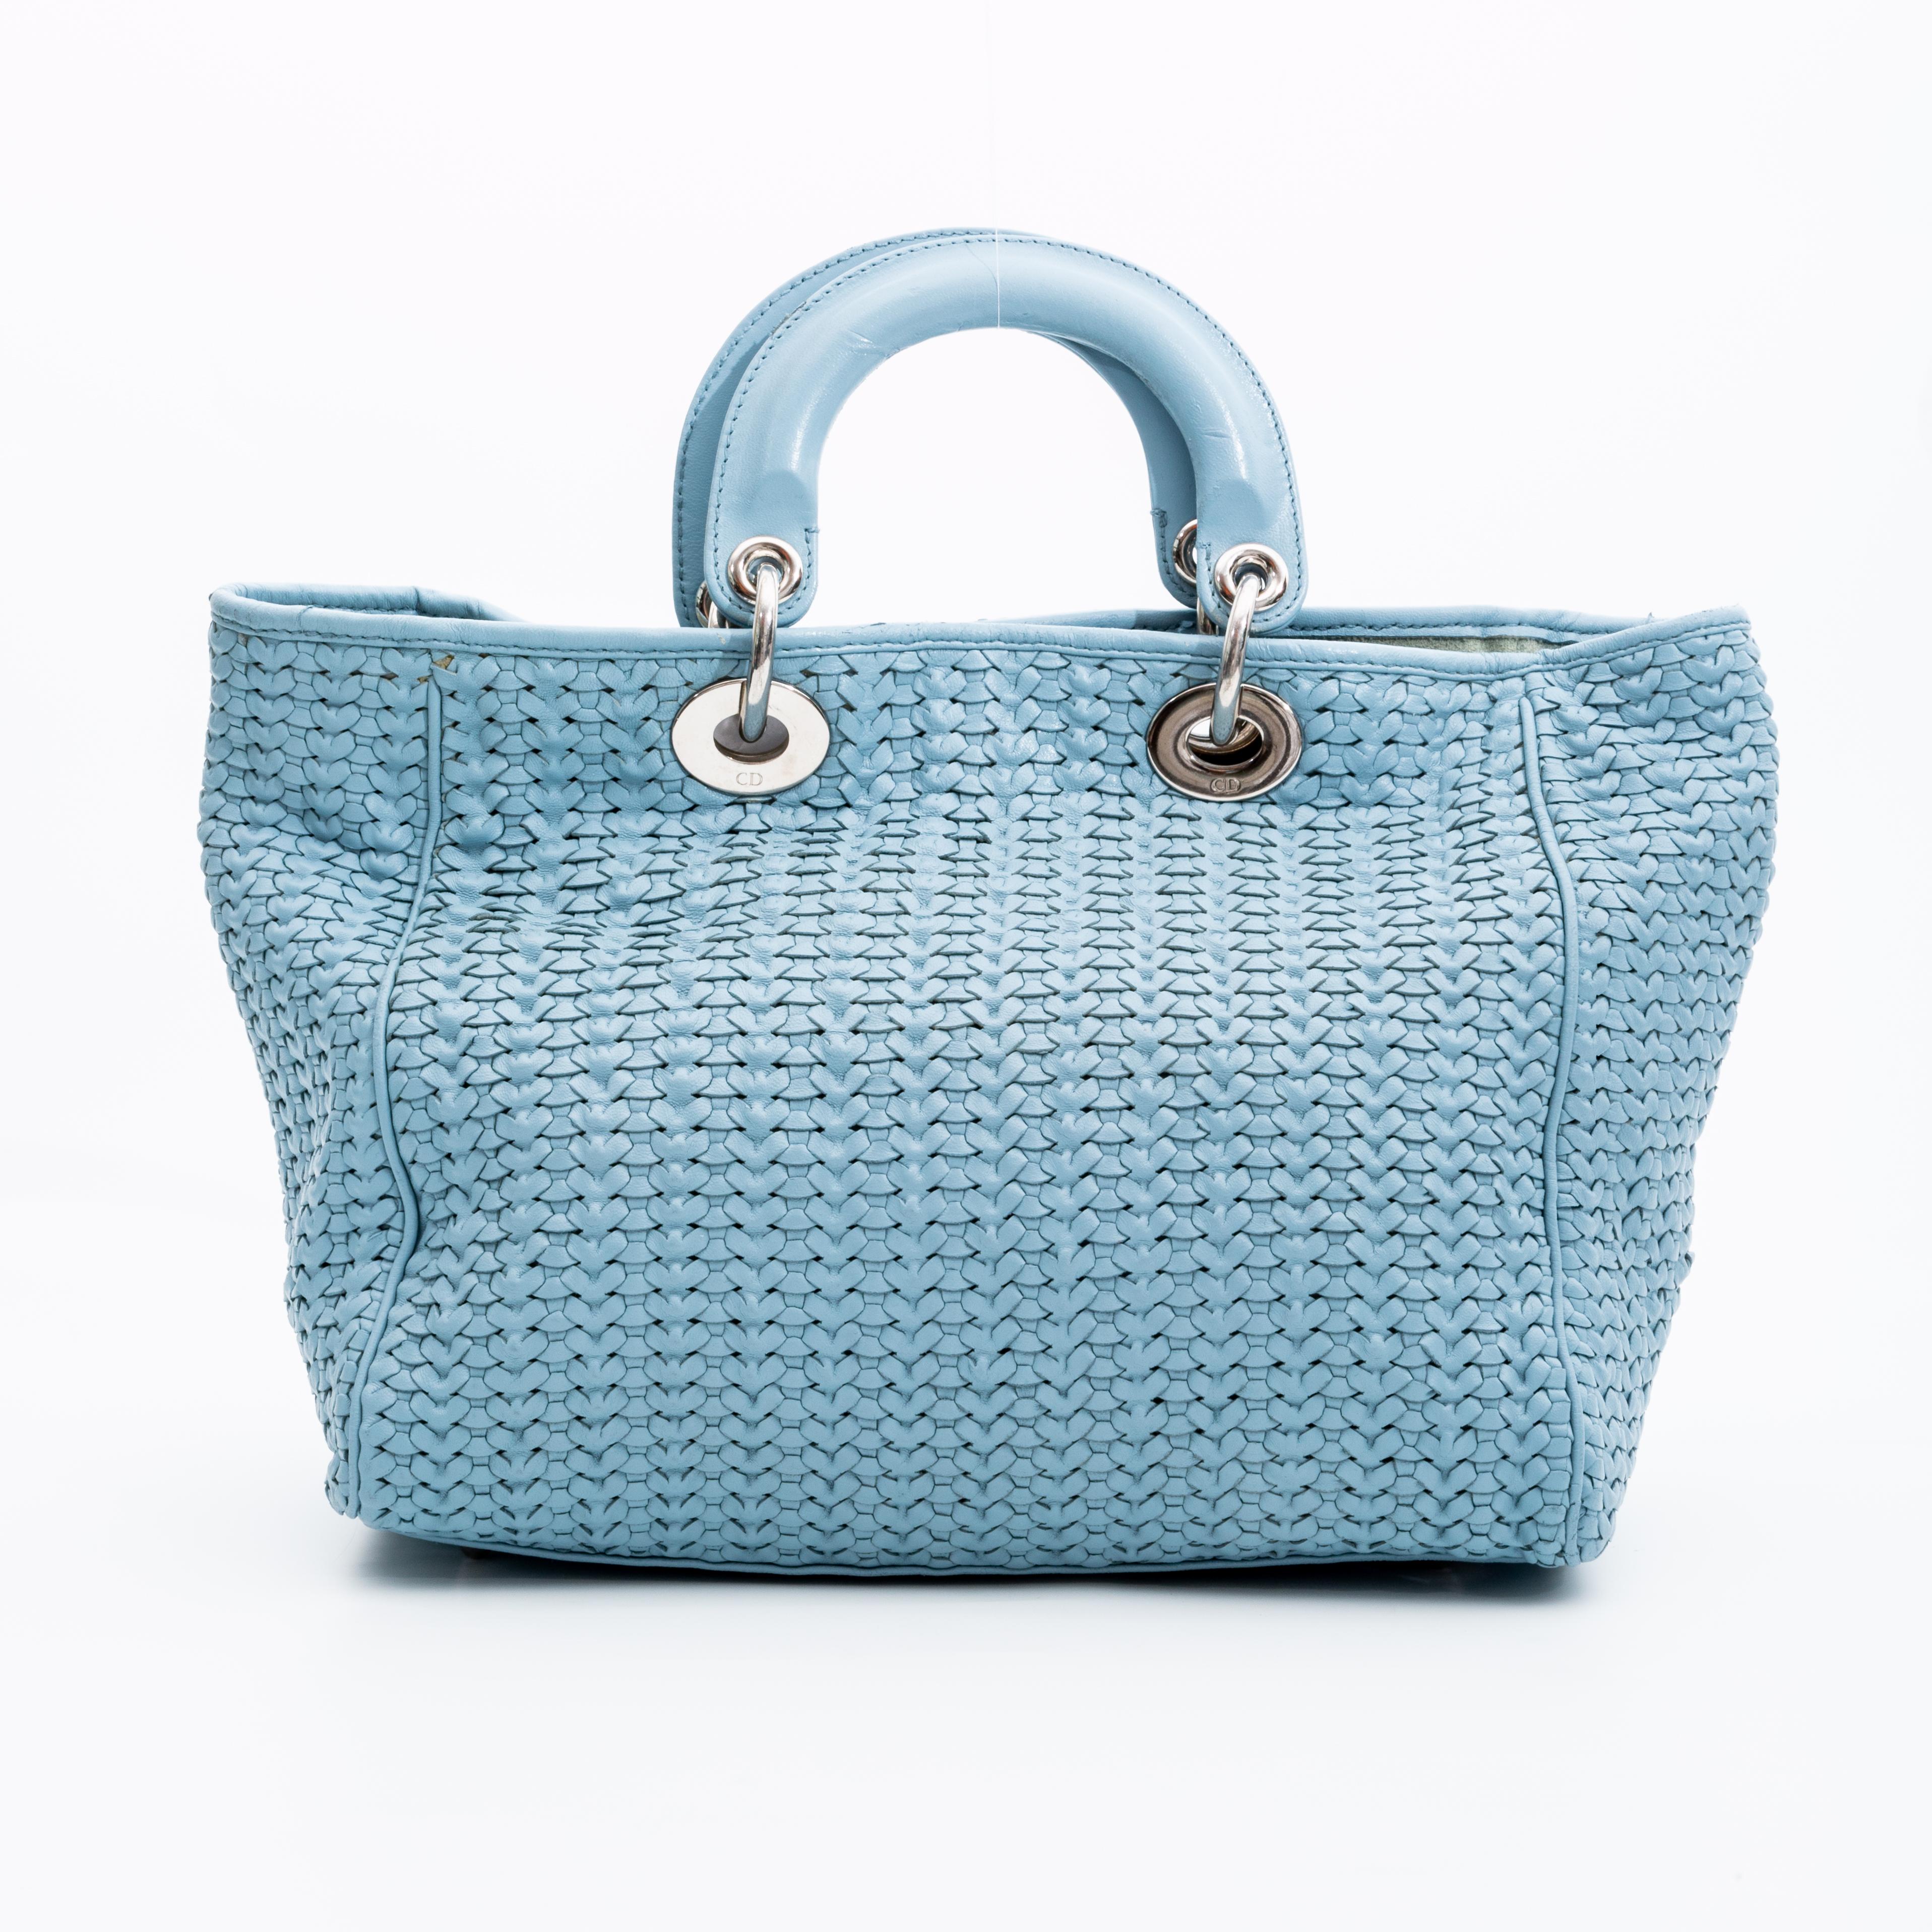 This icon Lady Dior bag is the smaller size model and features woven leather in pastel blue, sliver-tone hardware, Dior charms, dual handles attached with round links, an open top with snap closure and microfiber interior lining.

COLOR: Baby